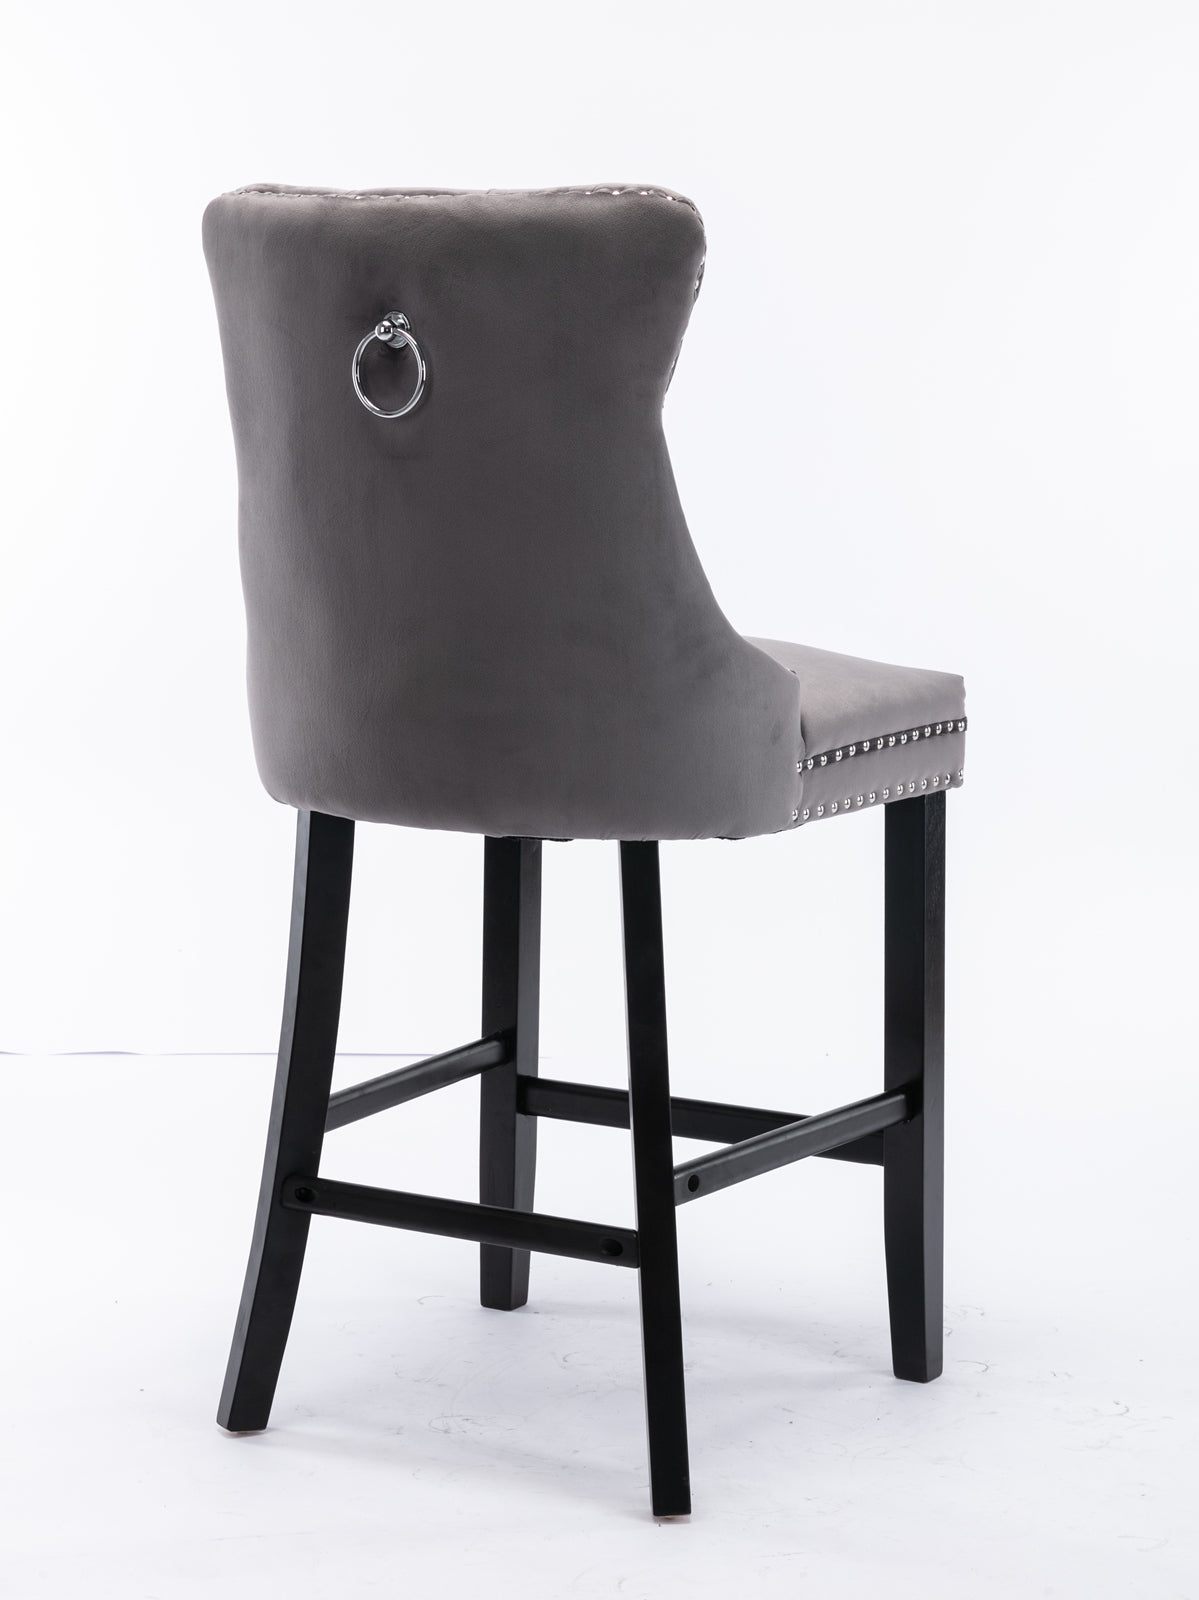 ZNTS A&A Furniture,Contemporary Velvet Upholstered Barstools with Button Tufted Decoration and Wooden W114342030